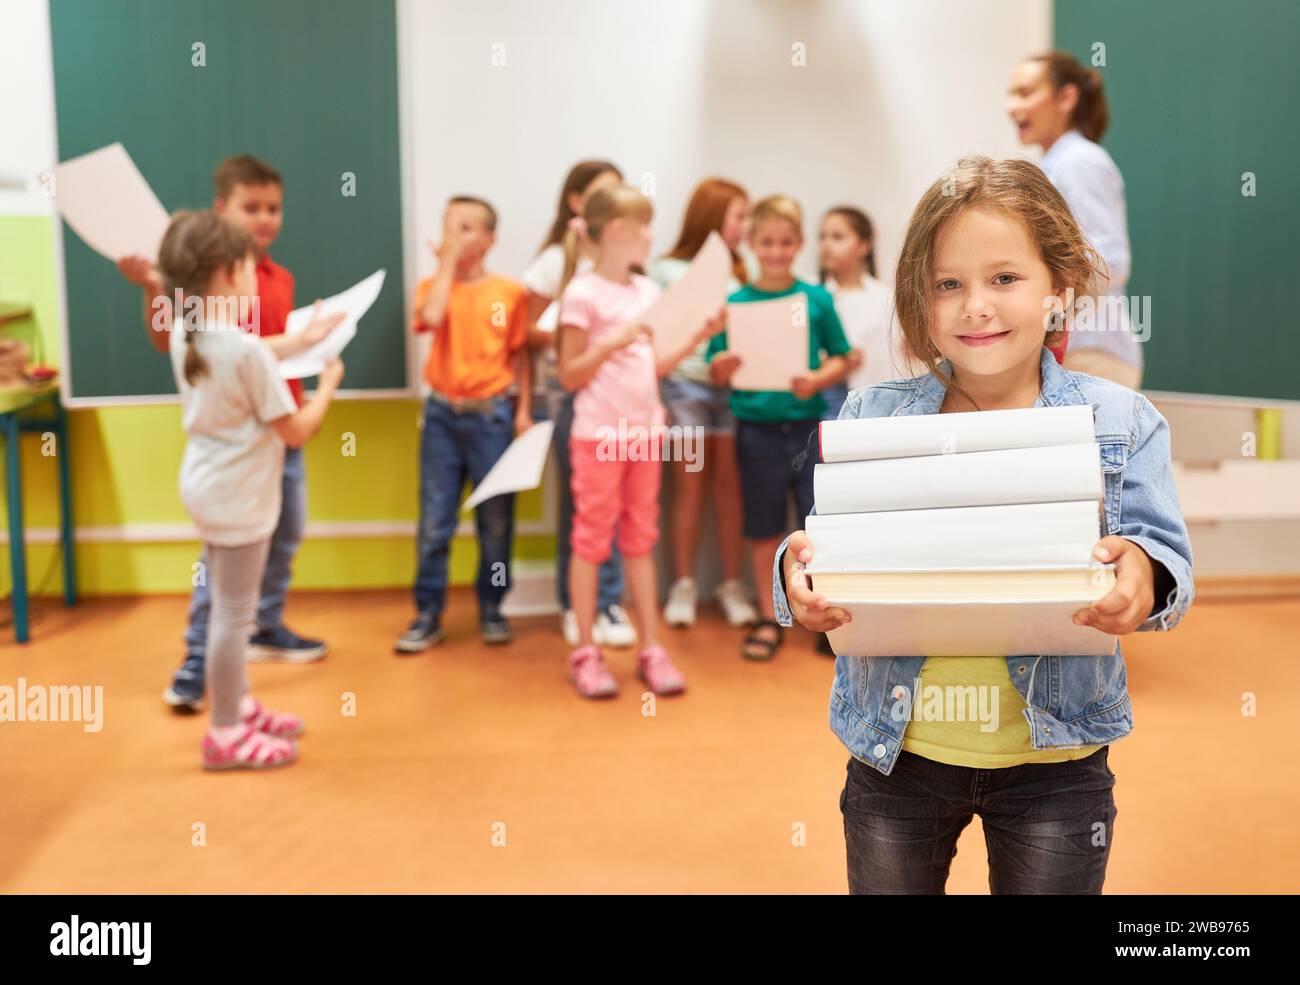 Portrait of smiling elementary schoolgirl holding stack of books while standing in classroom Stock Photo